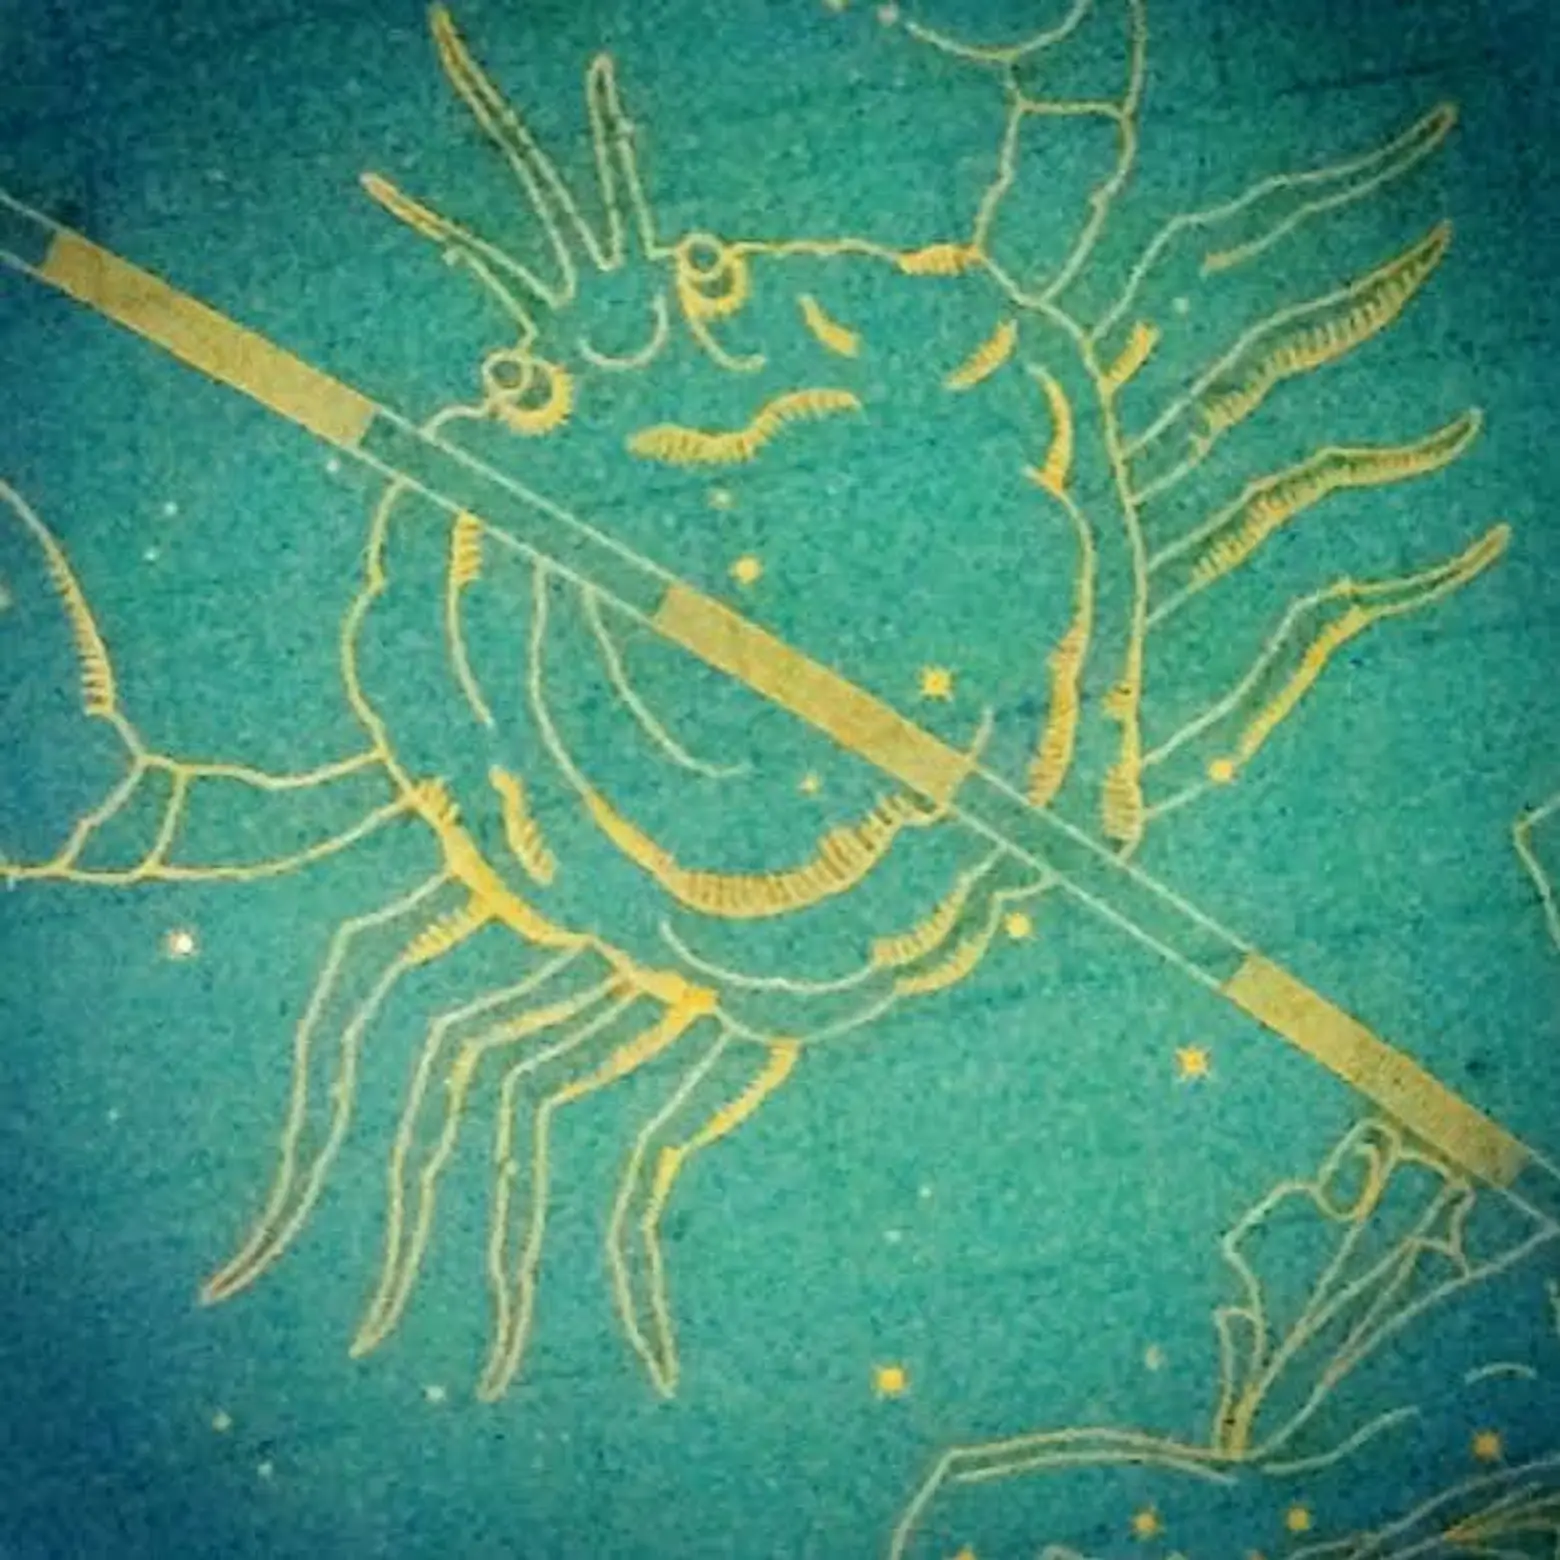 3c. Grand Central Station, detail of ceiling with Cancer zodiac symbol, 2016 (tam)